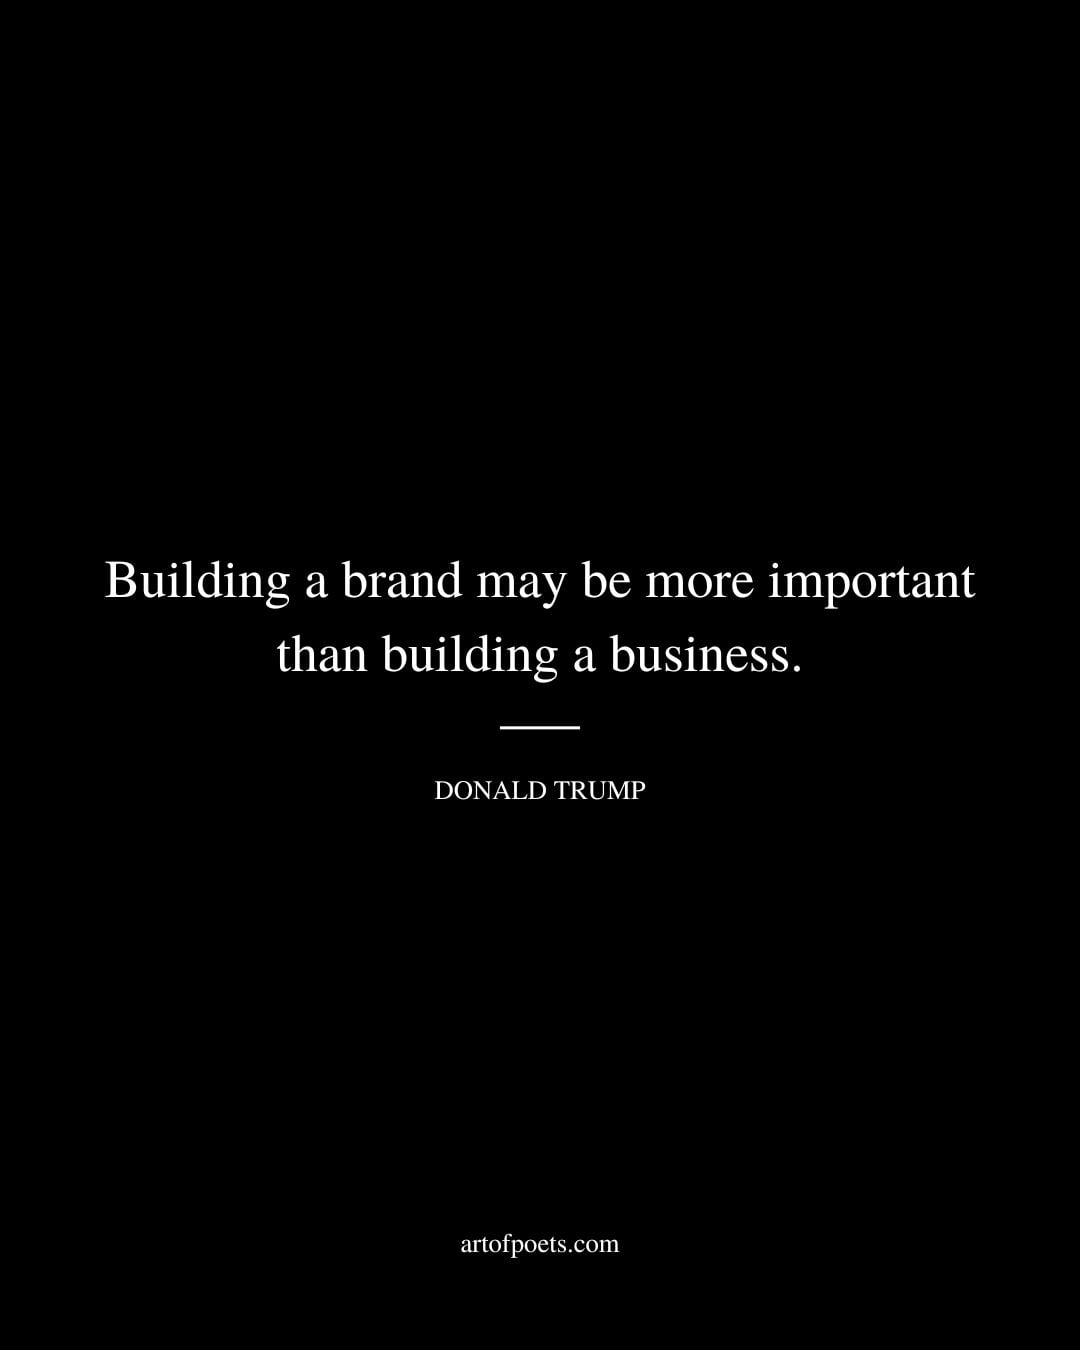 Building a brand may be more important than building a business